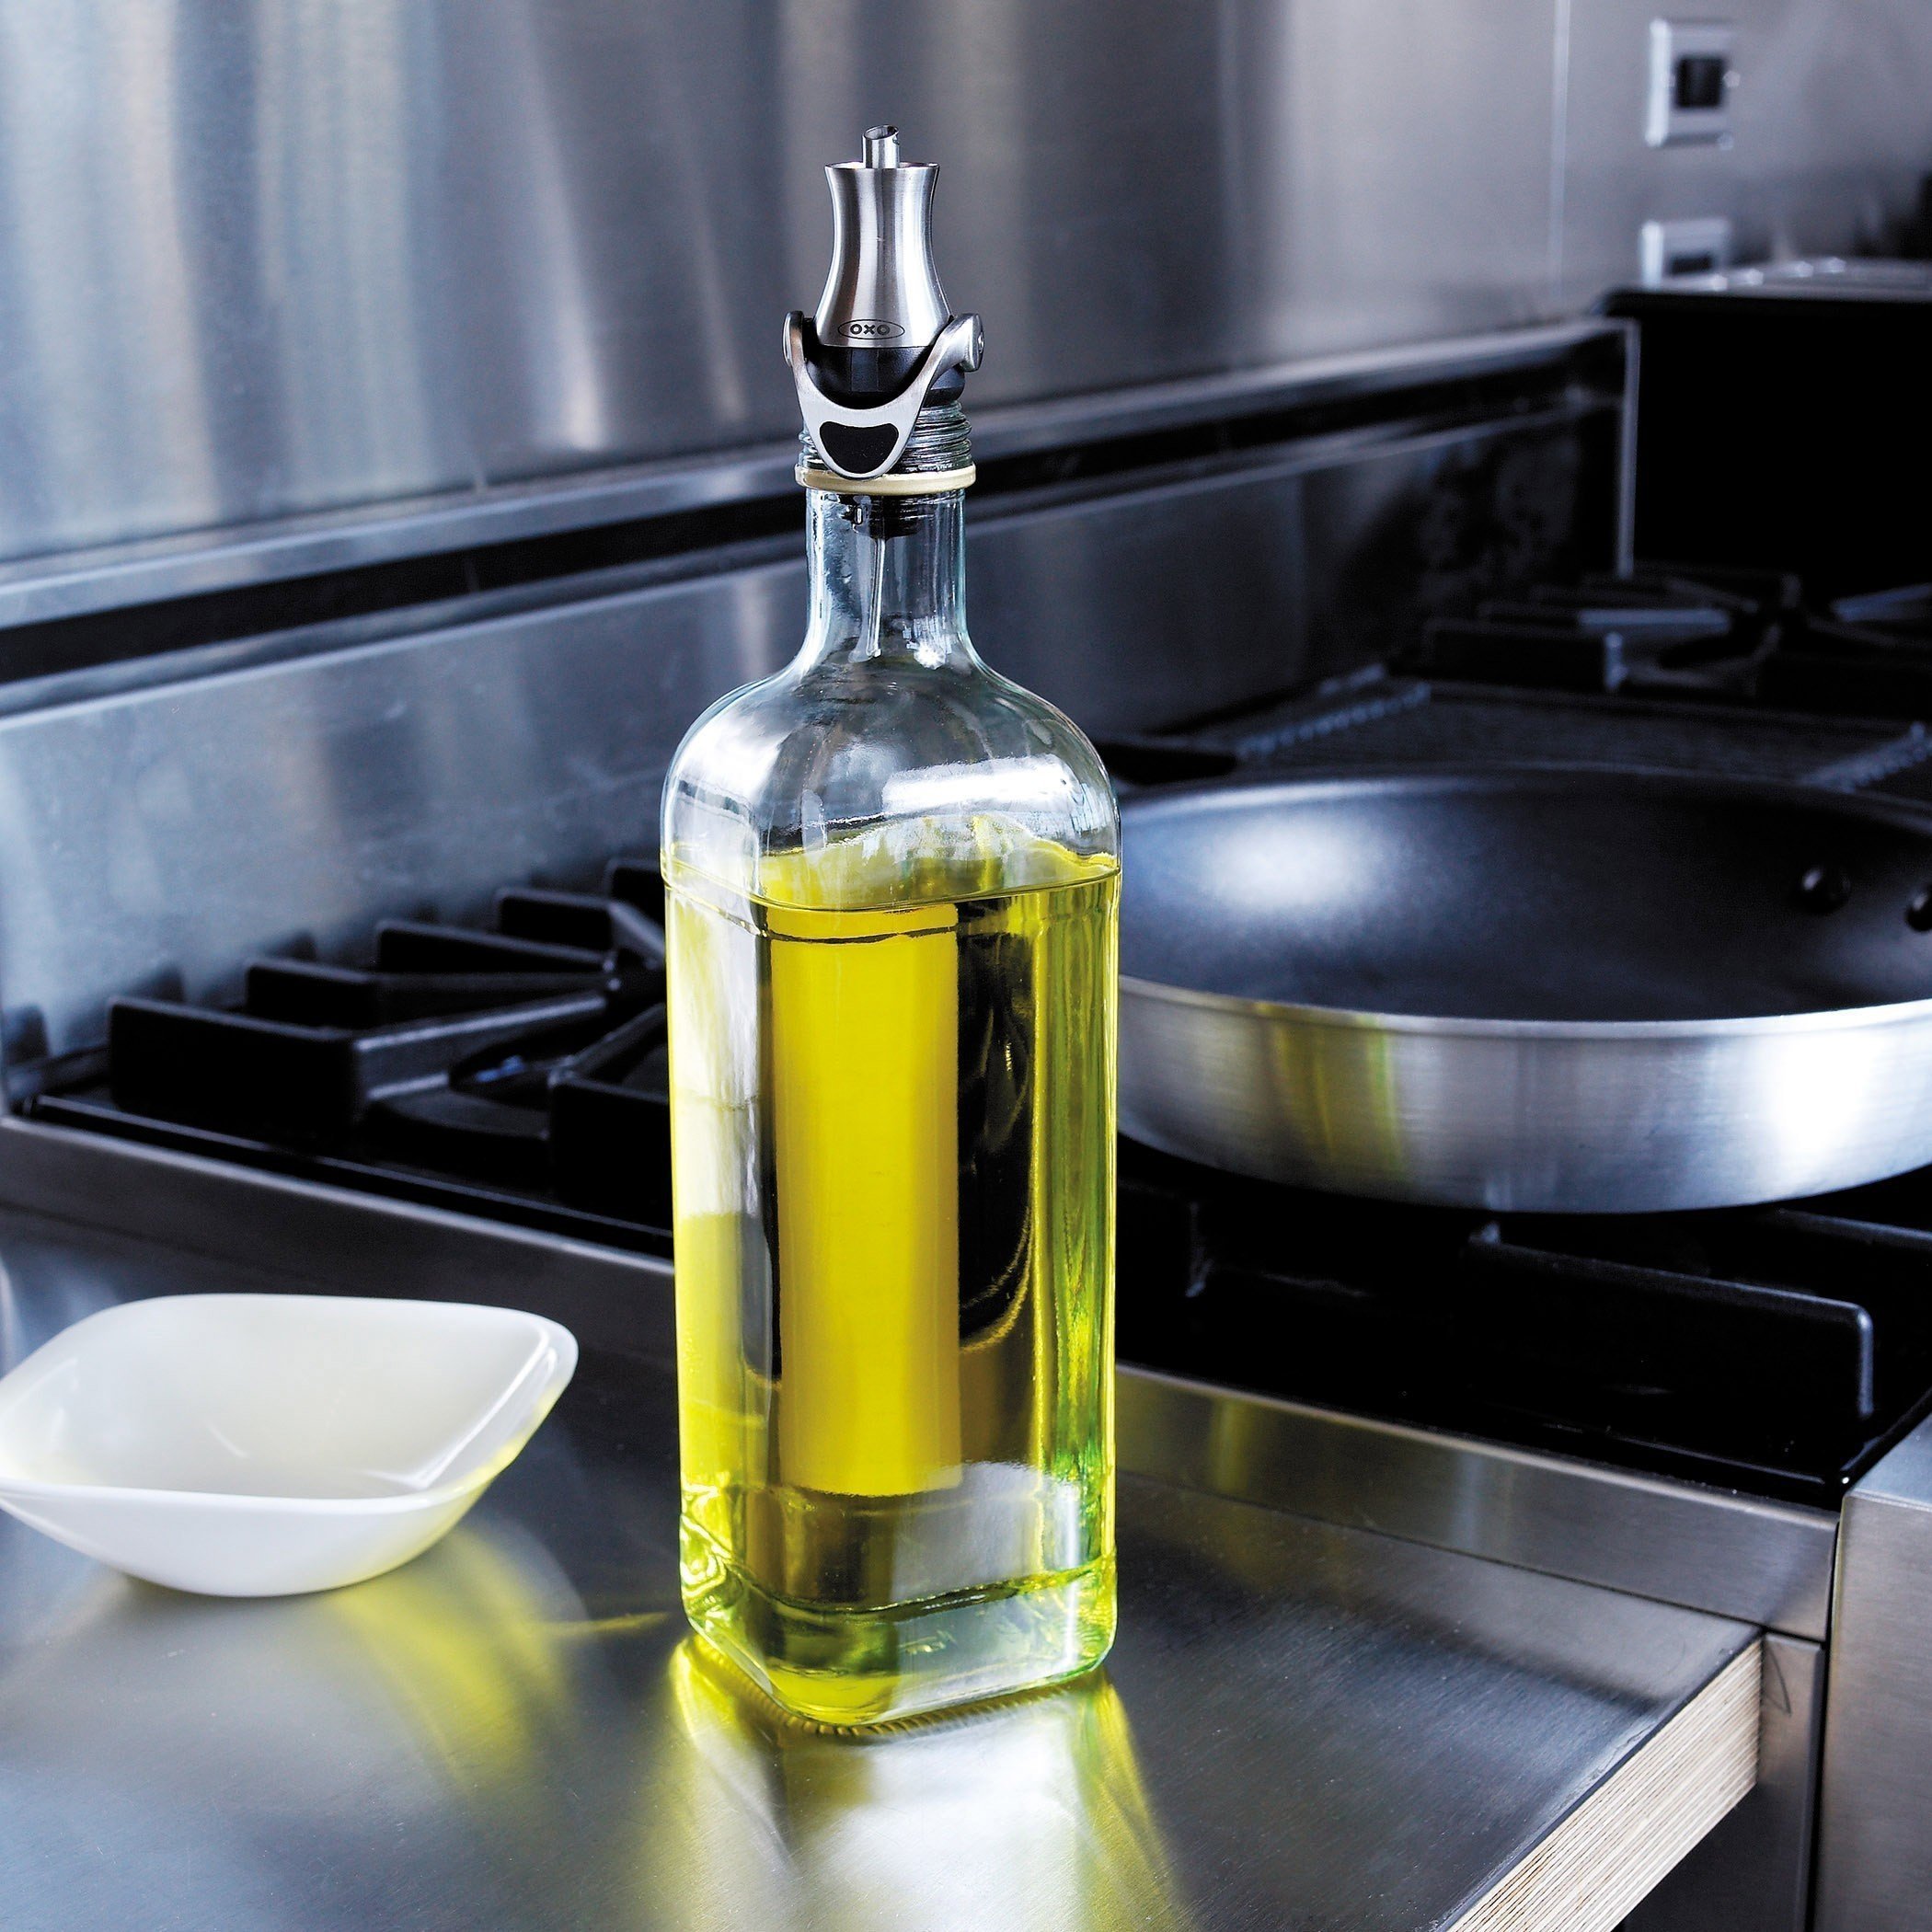 Good Grips Olive oil tap with stopper - Oxo 1151000MLNYK